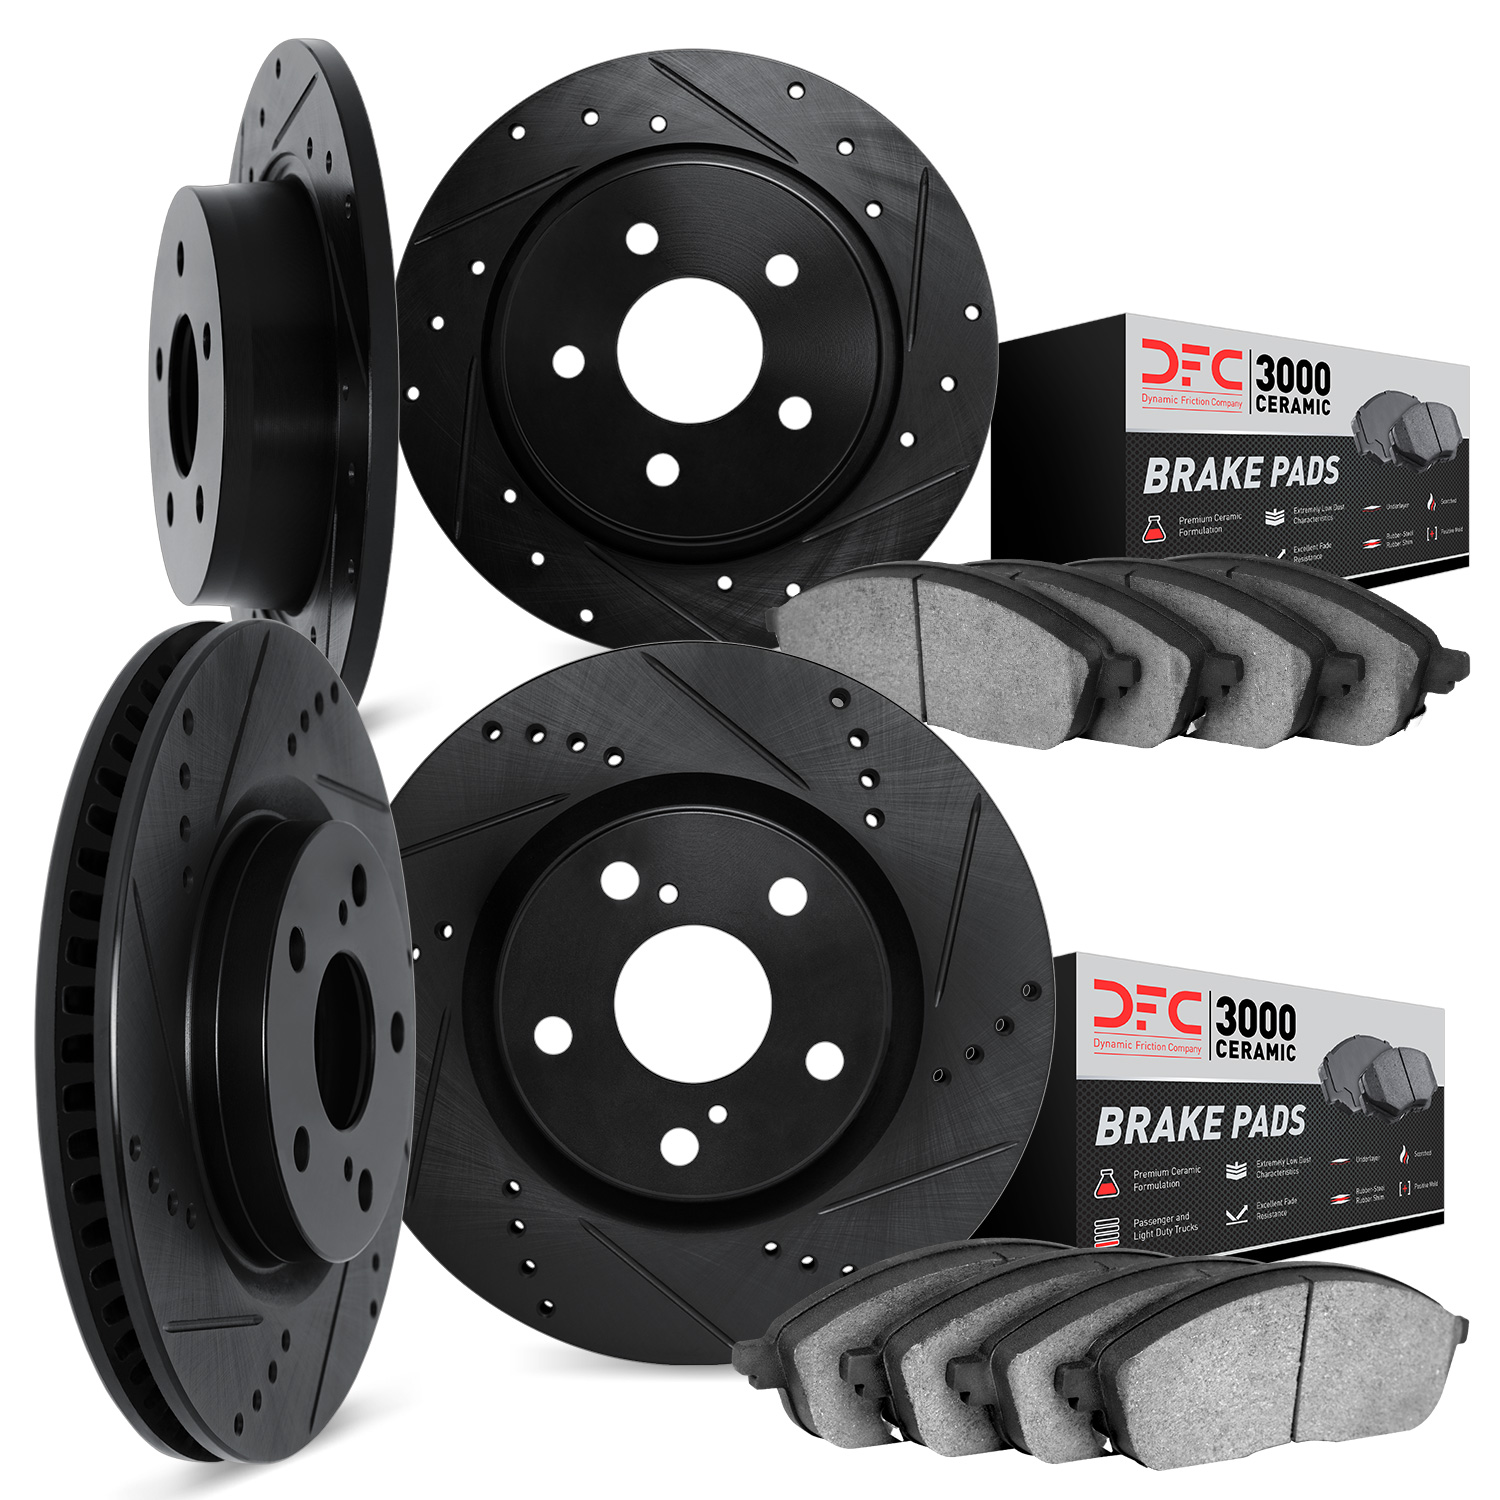 8304-59068 Drilled/Slotted Brake Rotors with 3000-Series Ceramic Brake Pads Kit [Black], 2006-2011 Acura/Honda, Position: Front